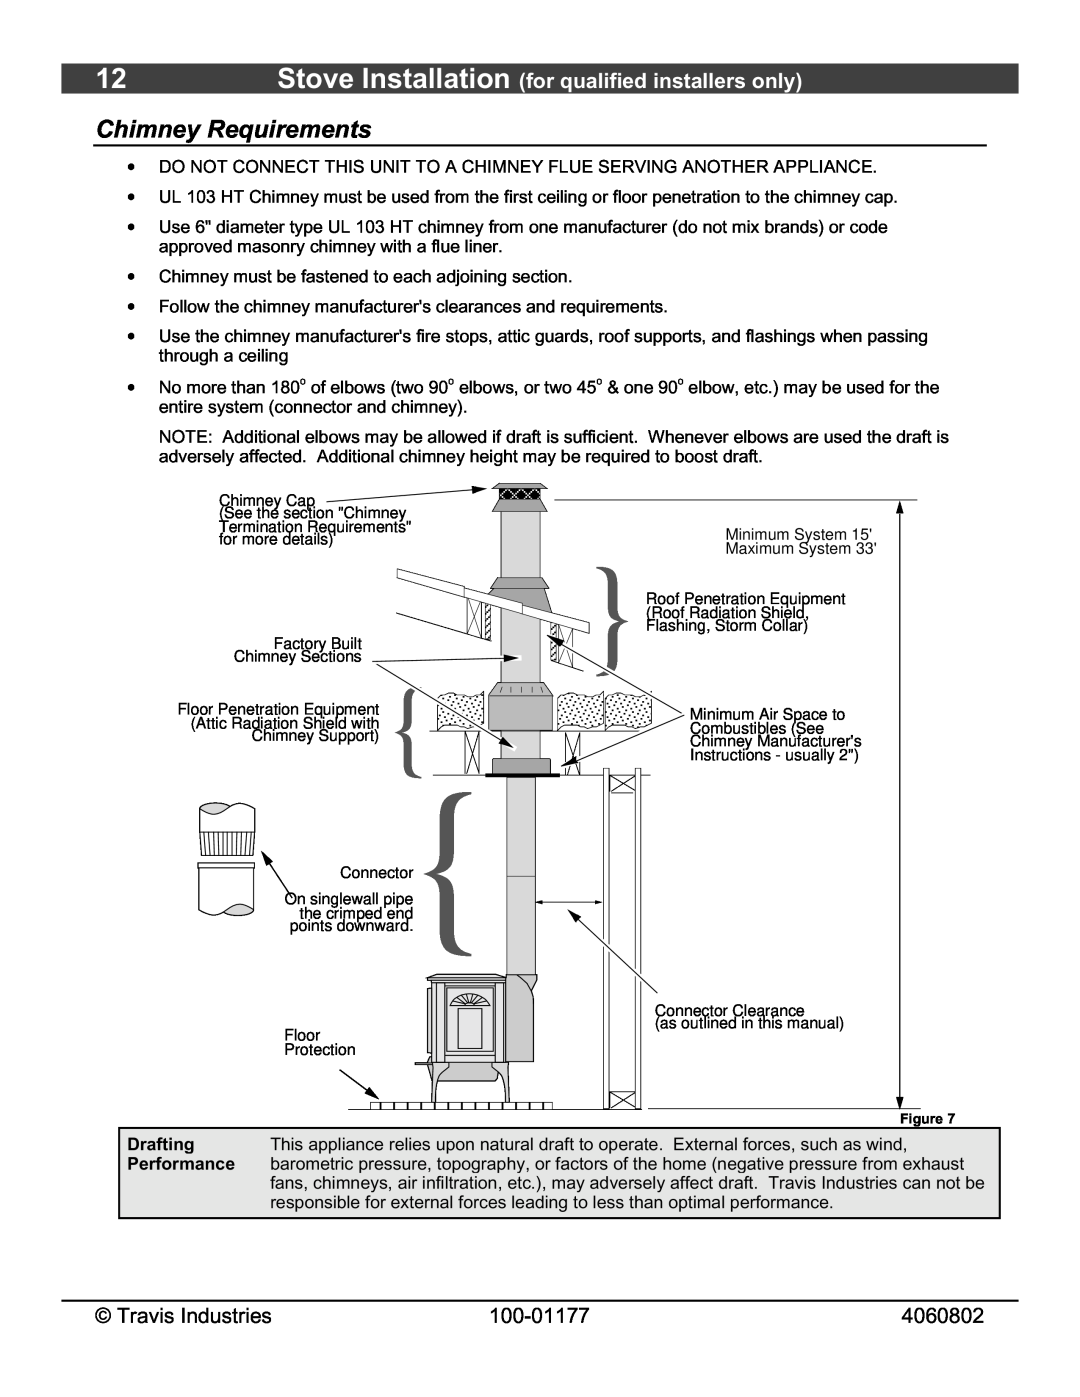 Lopi owner manual Chimney Requirements, Stove Installation for qualified installers only, Drafting, Performance 